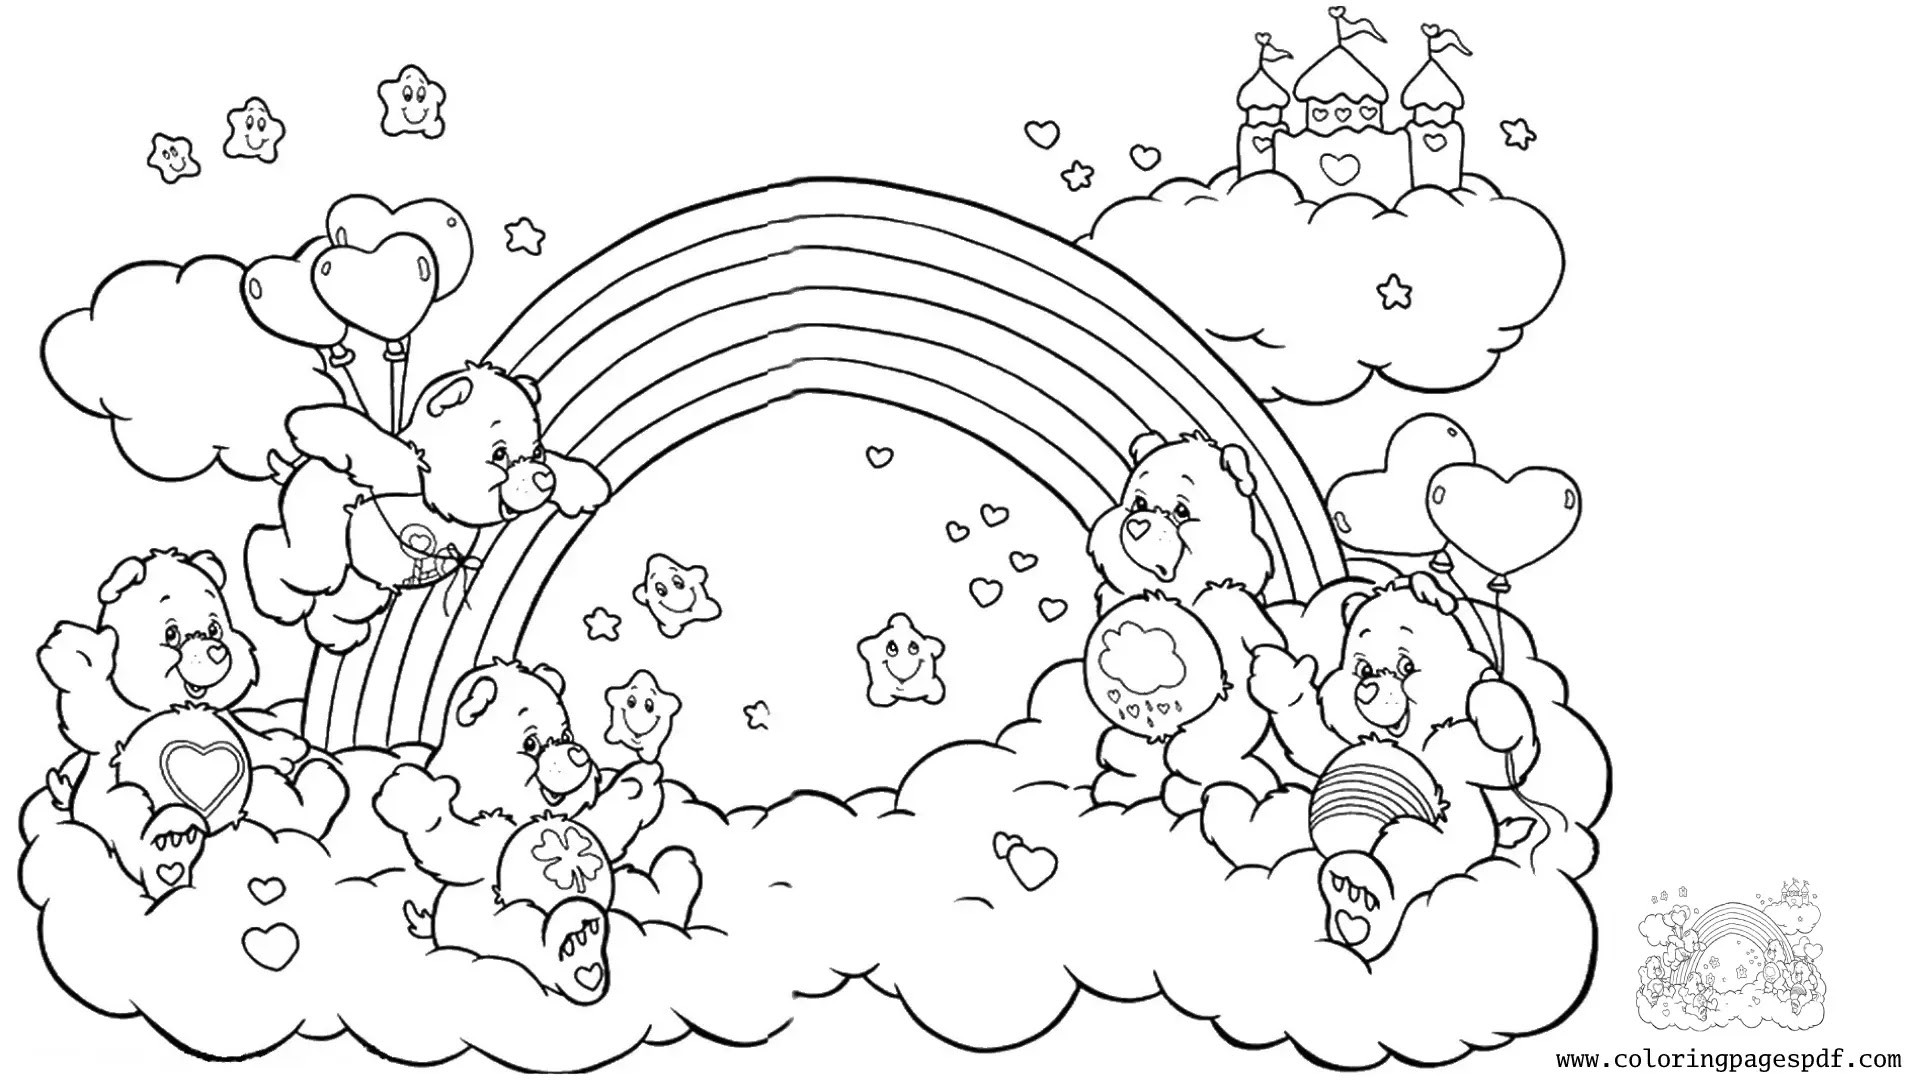 Coloring Pages Of Teddy Bears With A Rainbow